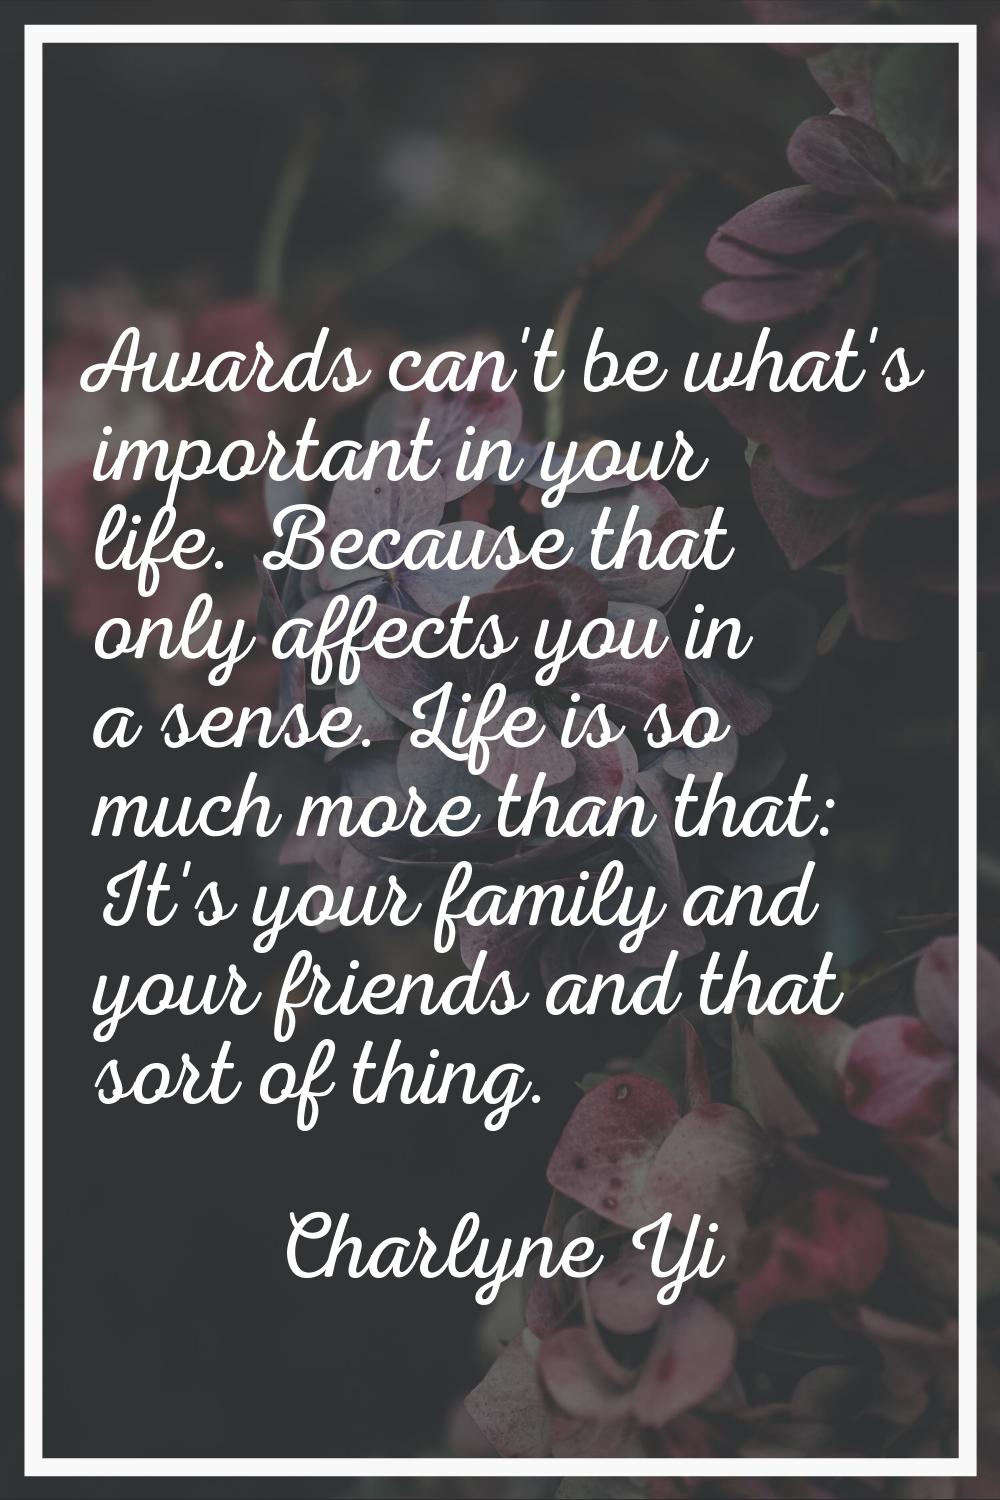 Awards can't be what's important in your life. Because that only affects you in a sense. Life is so